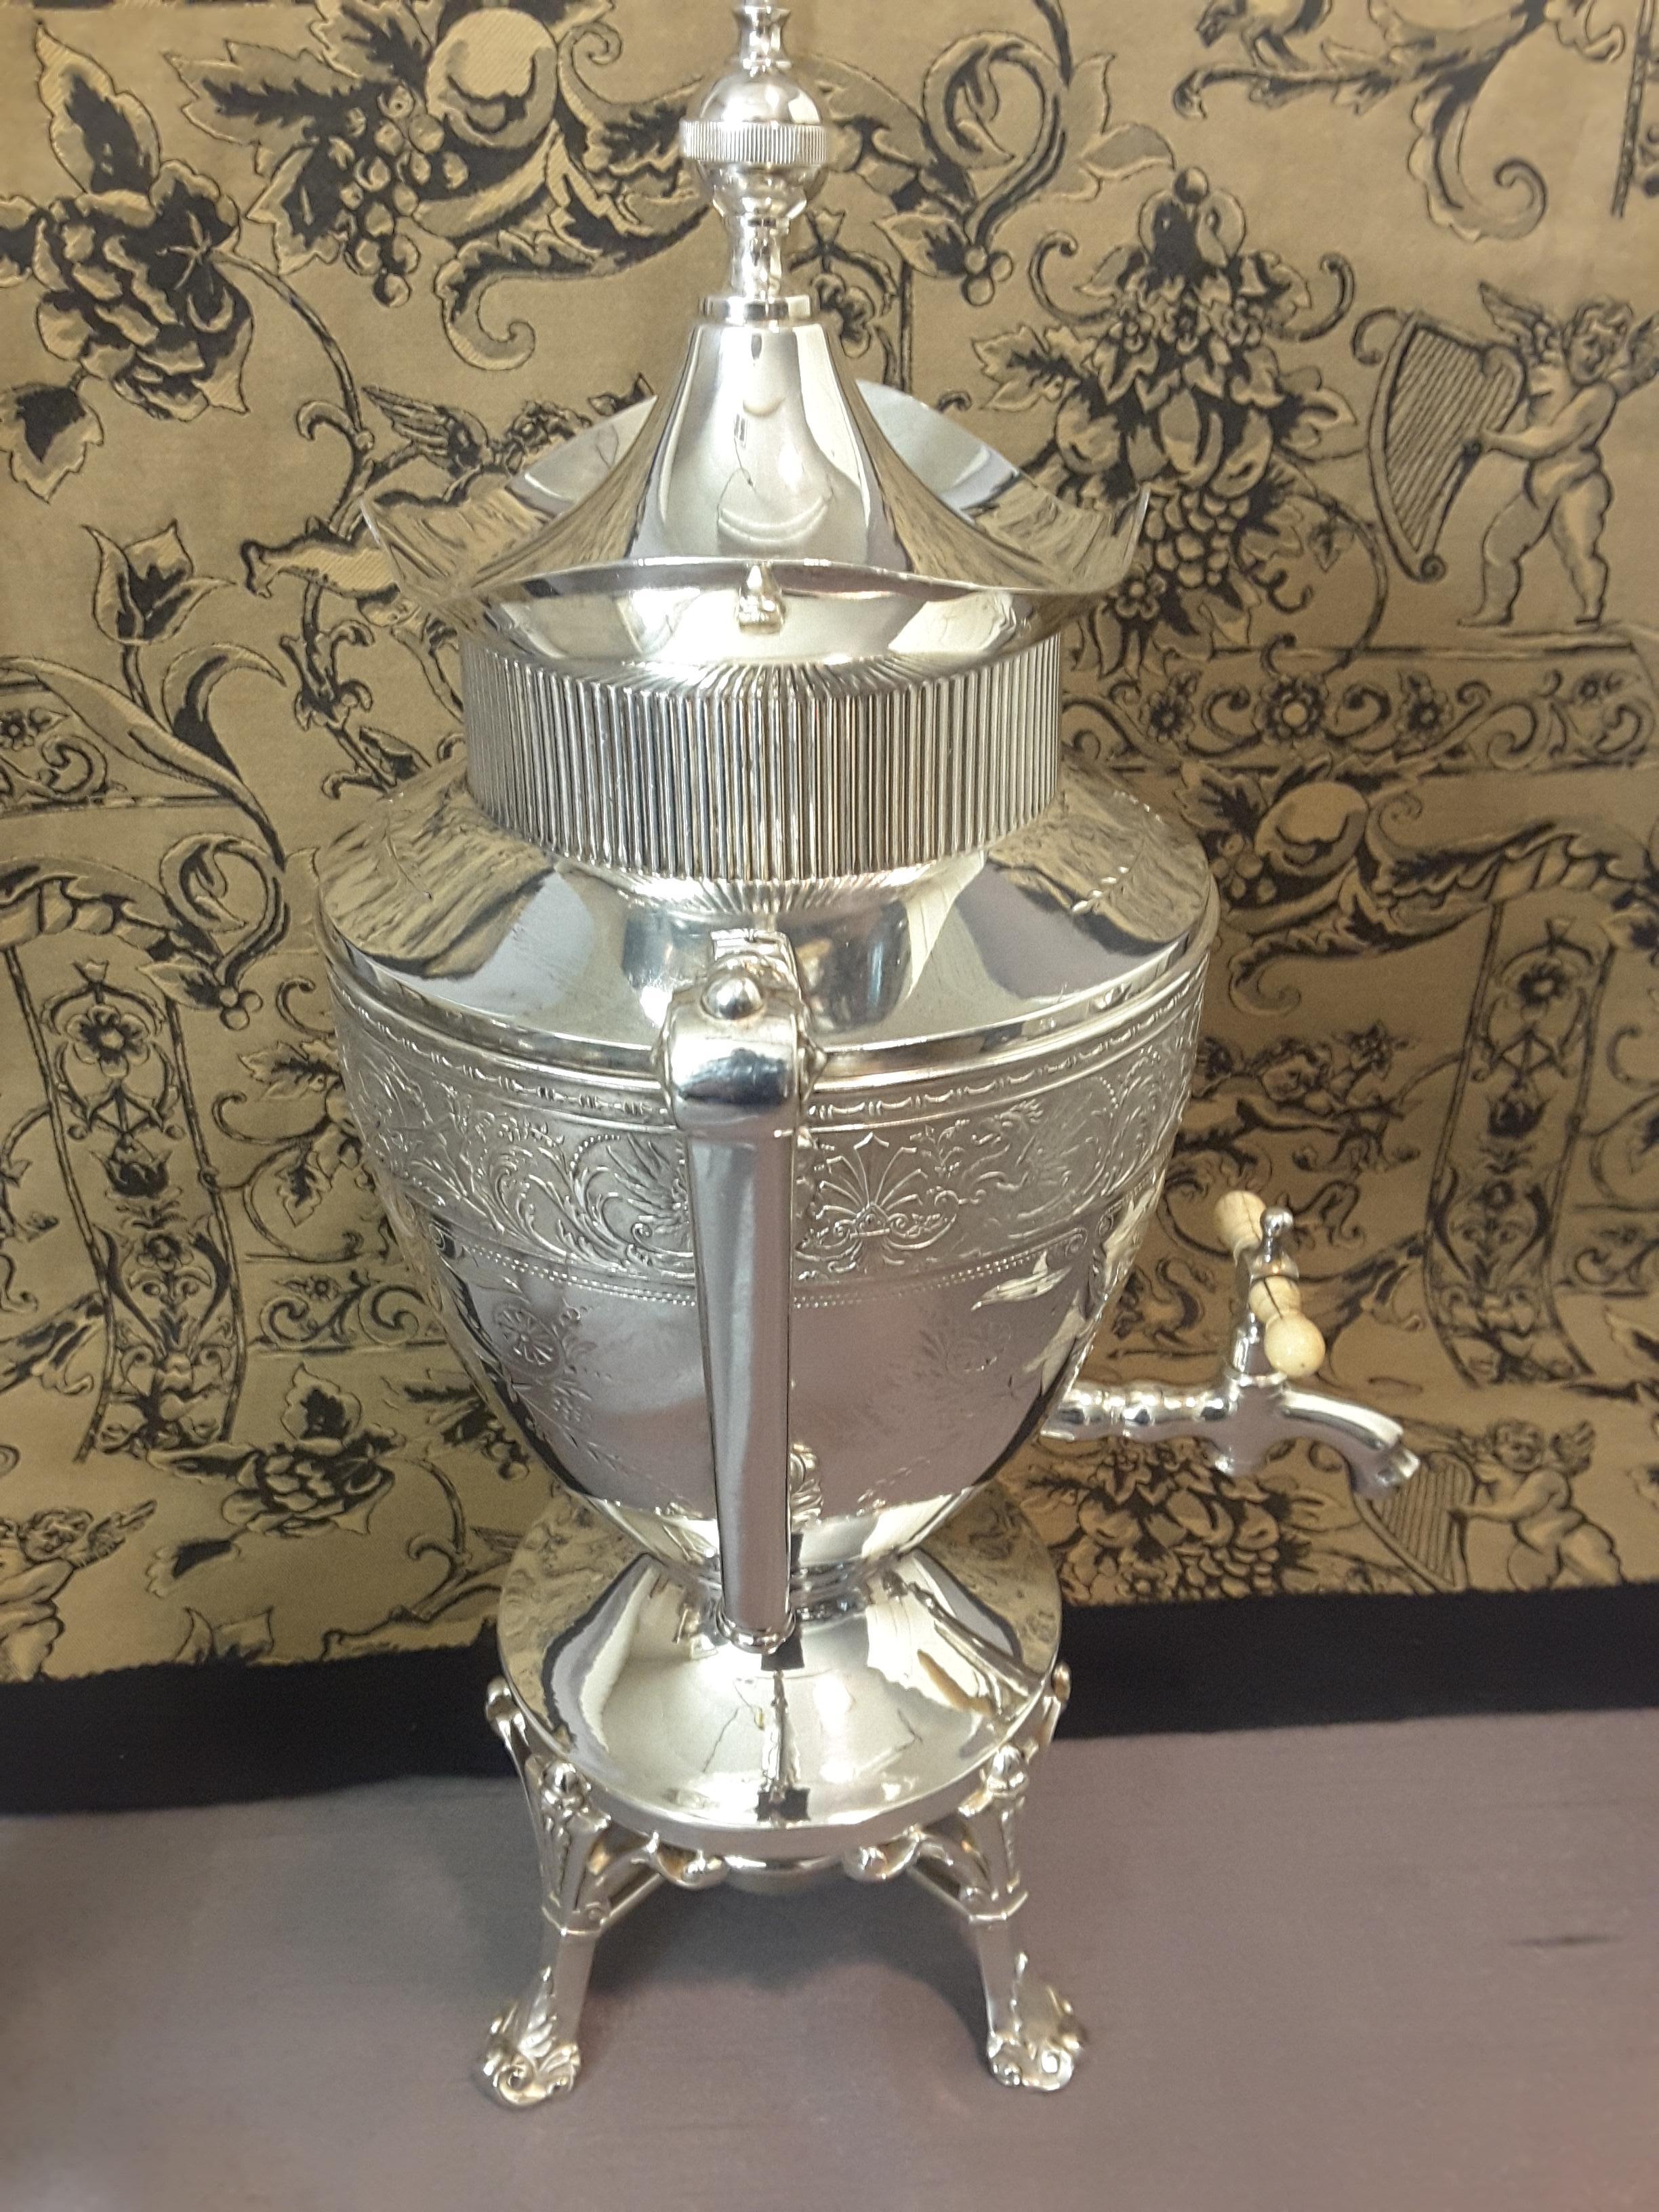 Exquisite Aesthetic Movement Silverplated Tea Service by Simpson, Hall & Miller For Sale 9